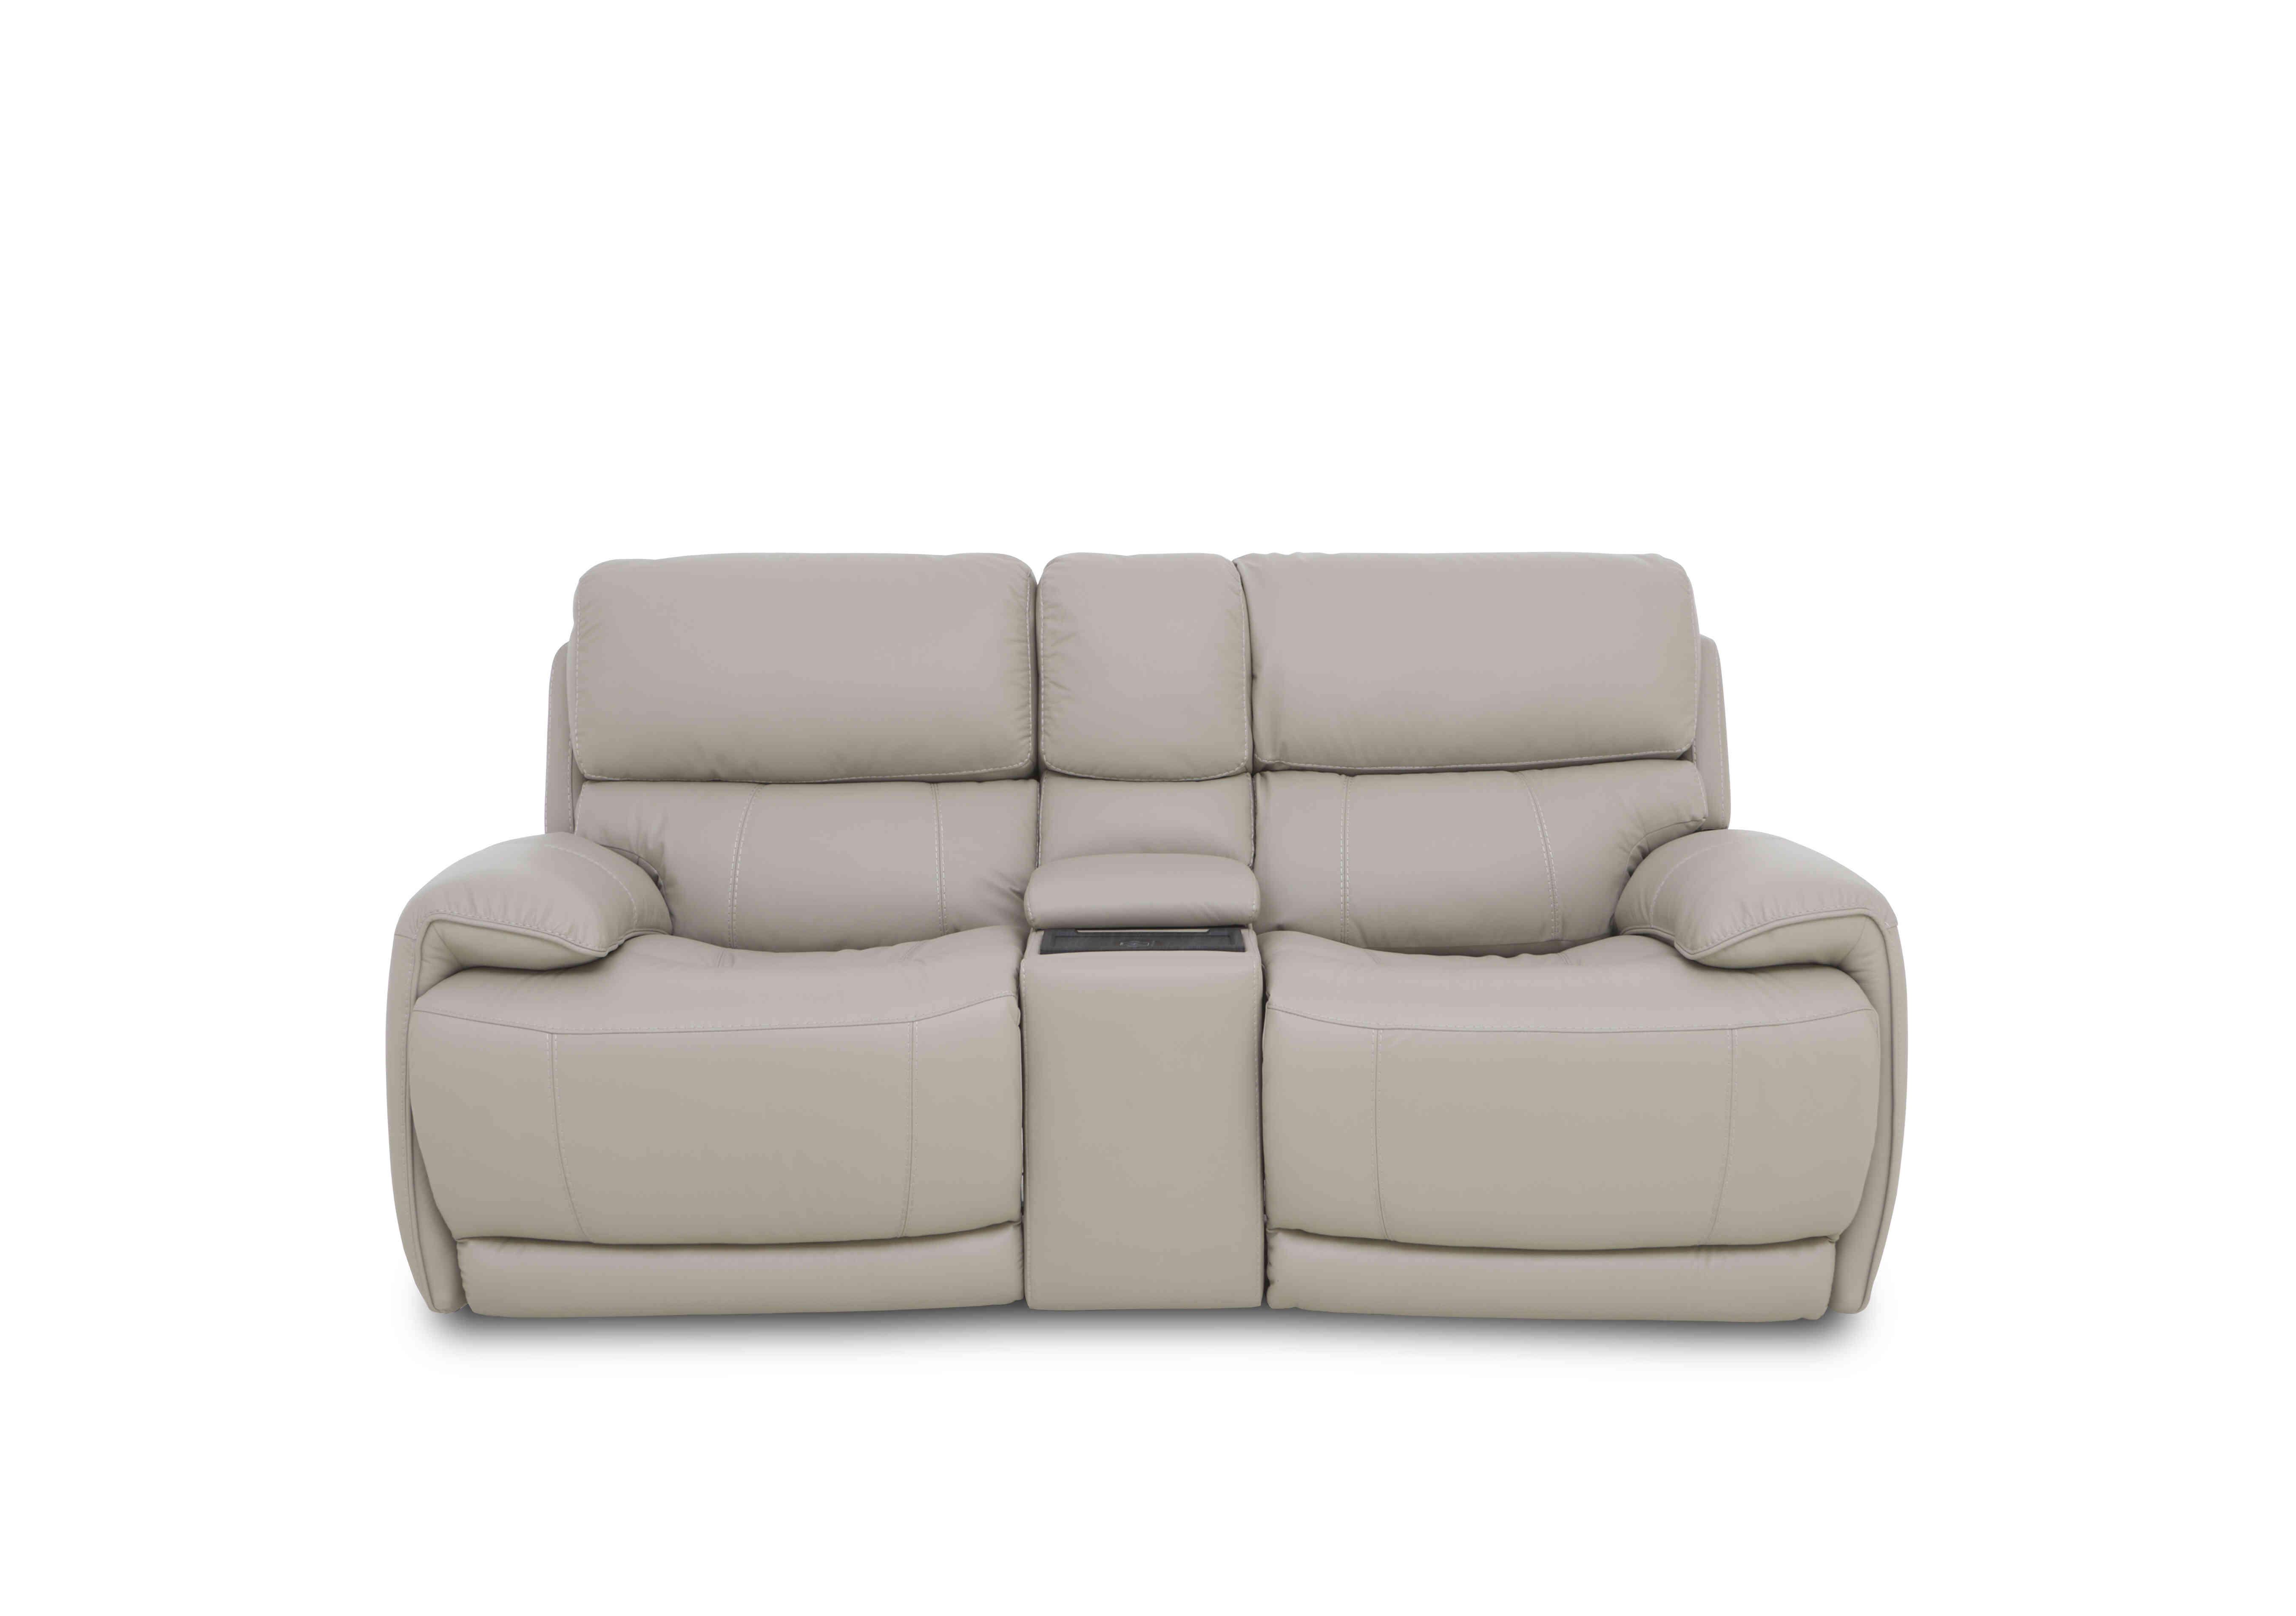 Rocco 2 Seater Leather Power Rocker Sofa with Cup Holders and Power Headrests in  on Furniture Village